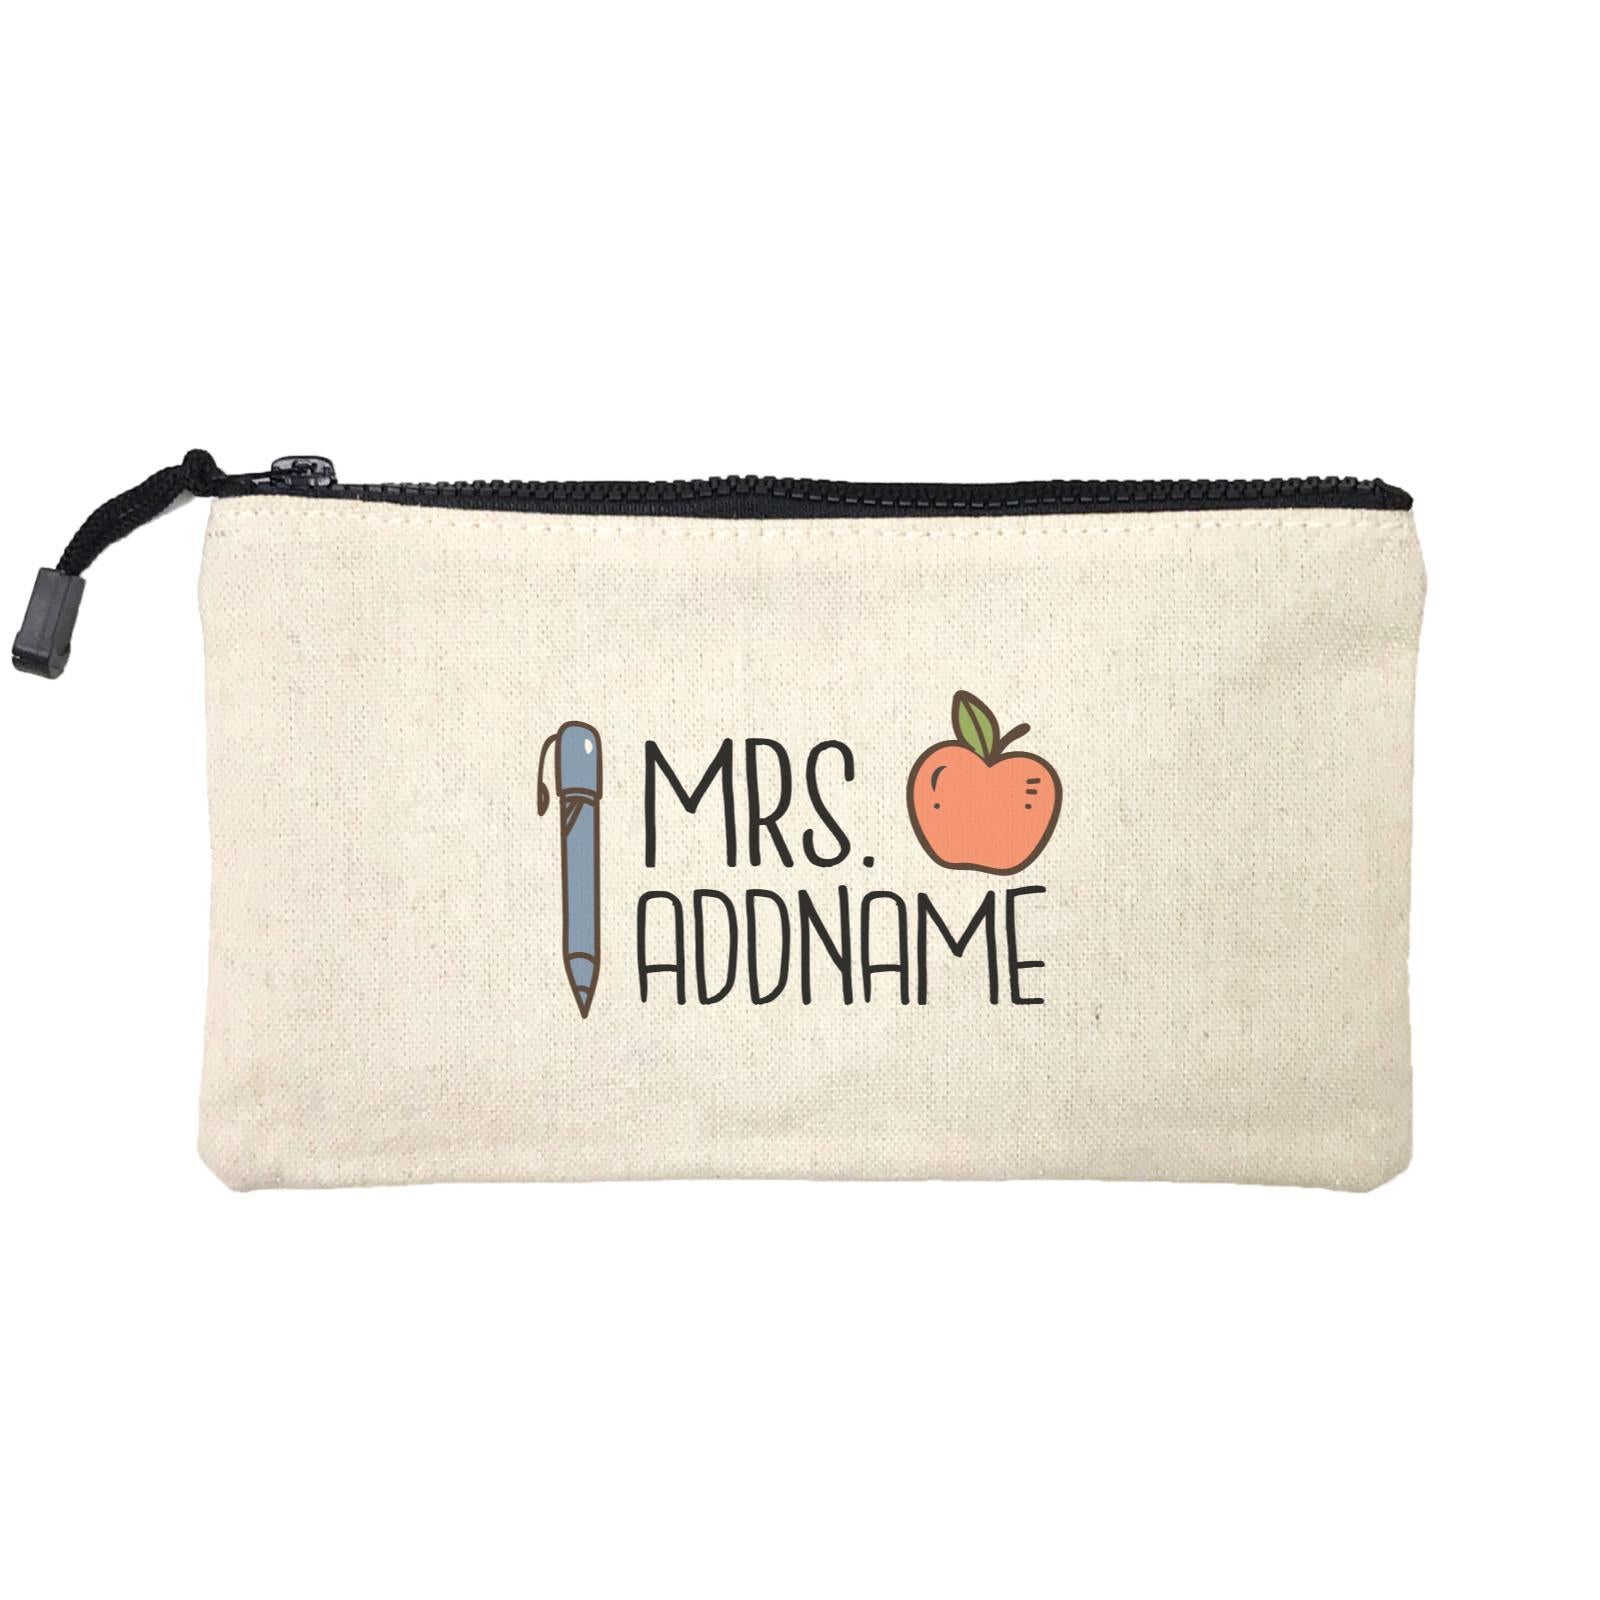 Teacher Addname Apple And Pen Mrs Addname Mini Accessories Stationery Pouch